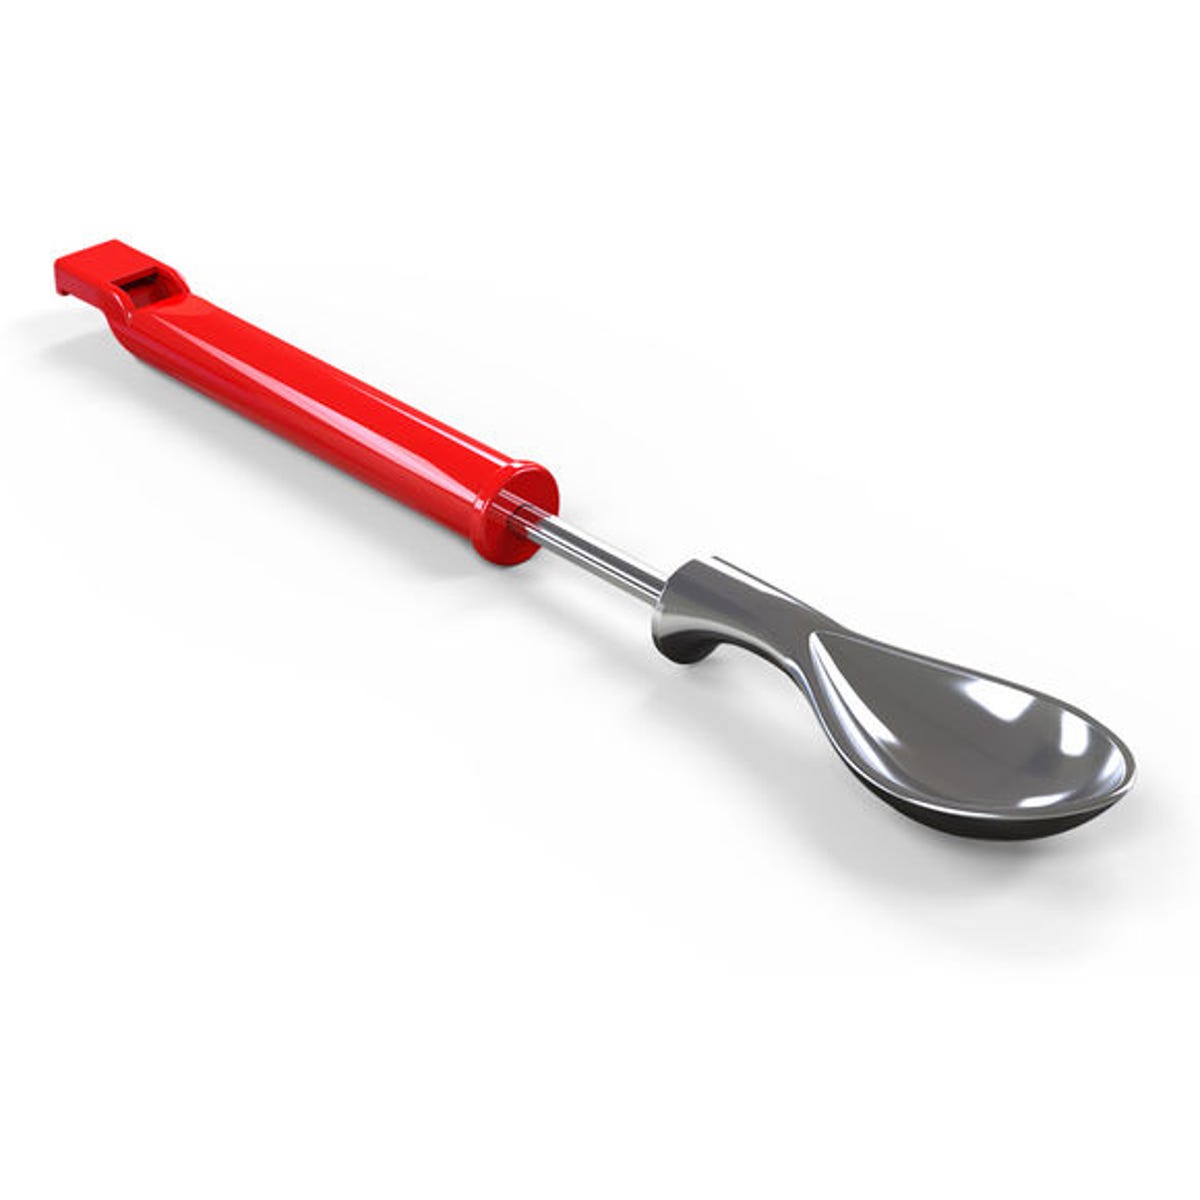 The Fred & Friends Sip & Slide whistle spoon makes music you can eat.